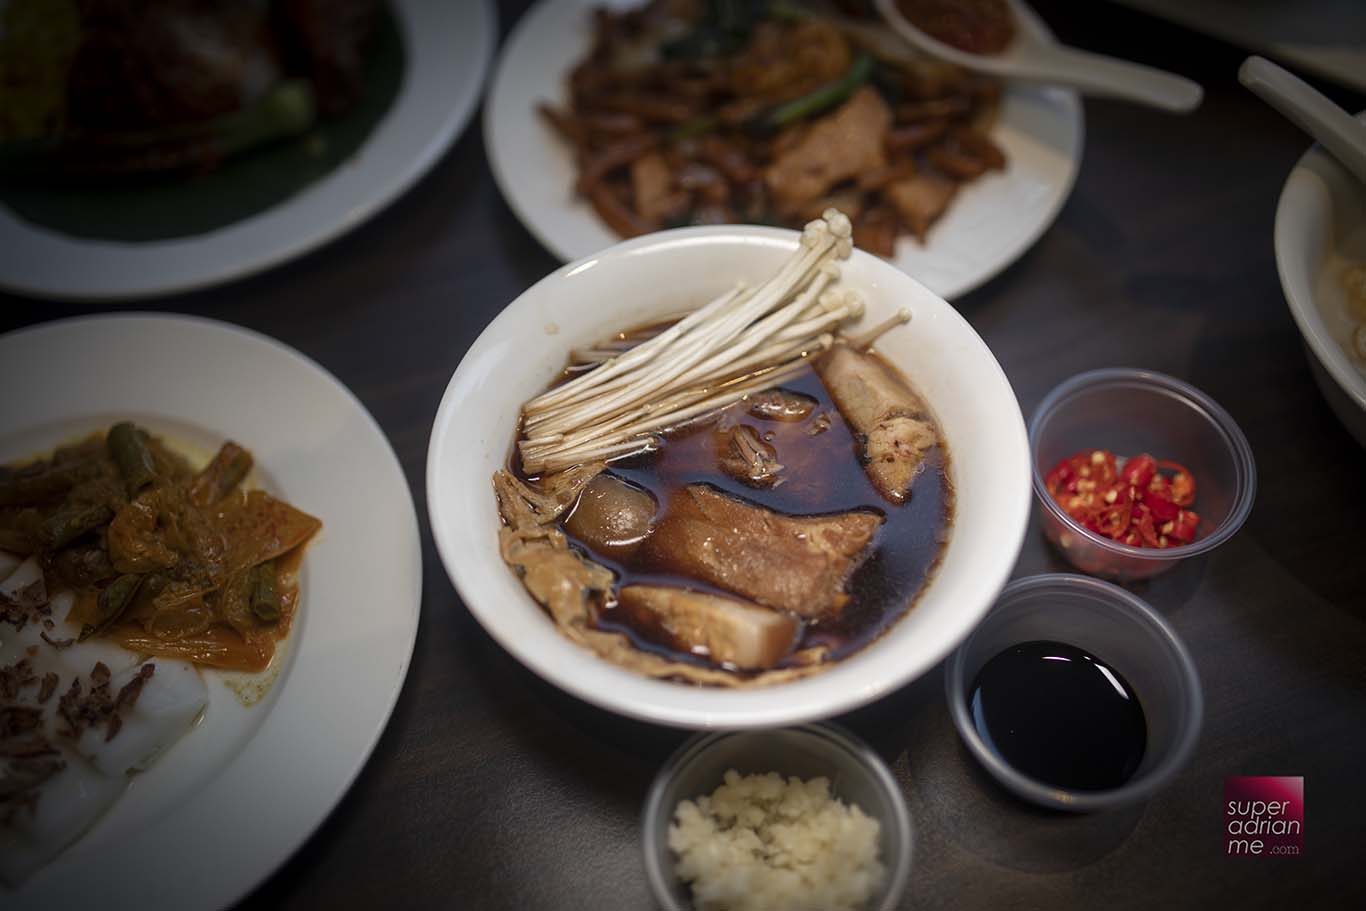 Bak Kut Teh from Klang at the Malaysia Street Food Fiesta Promotion at White Rose Café till 7 July 2019